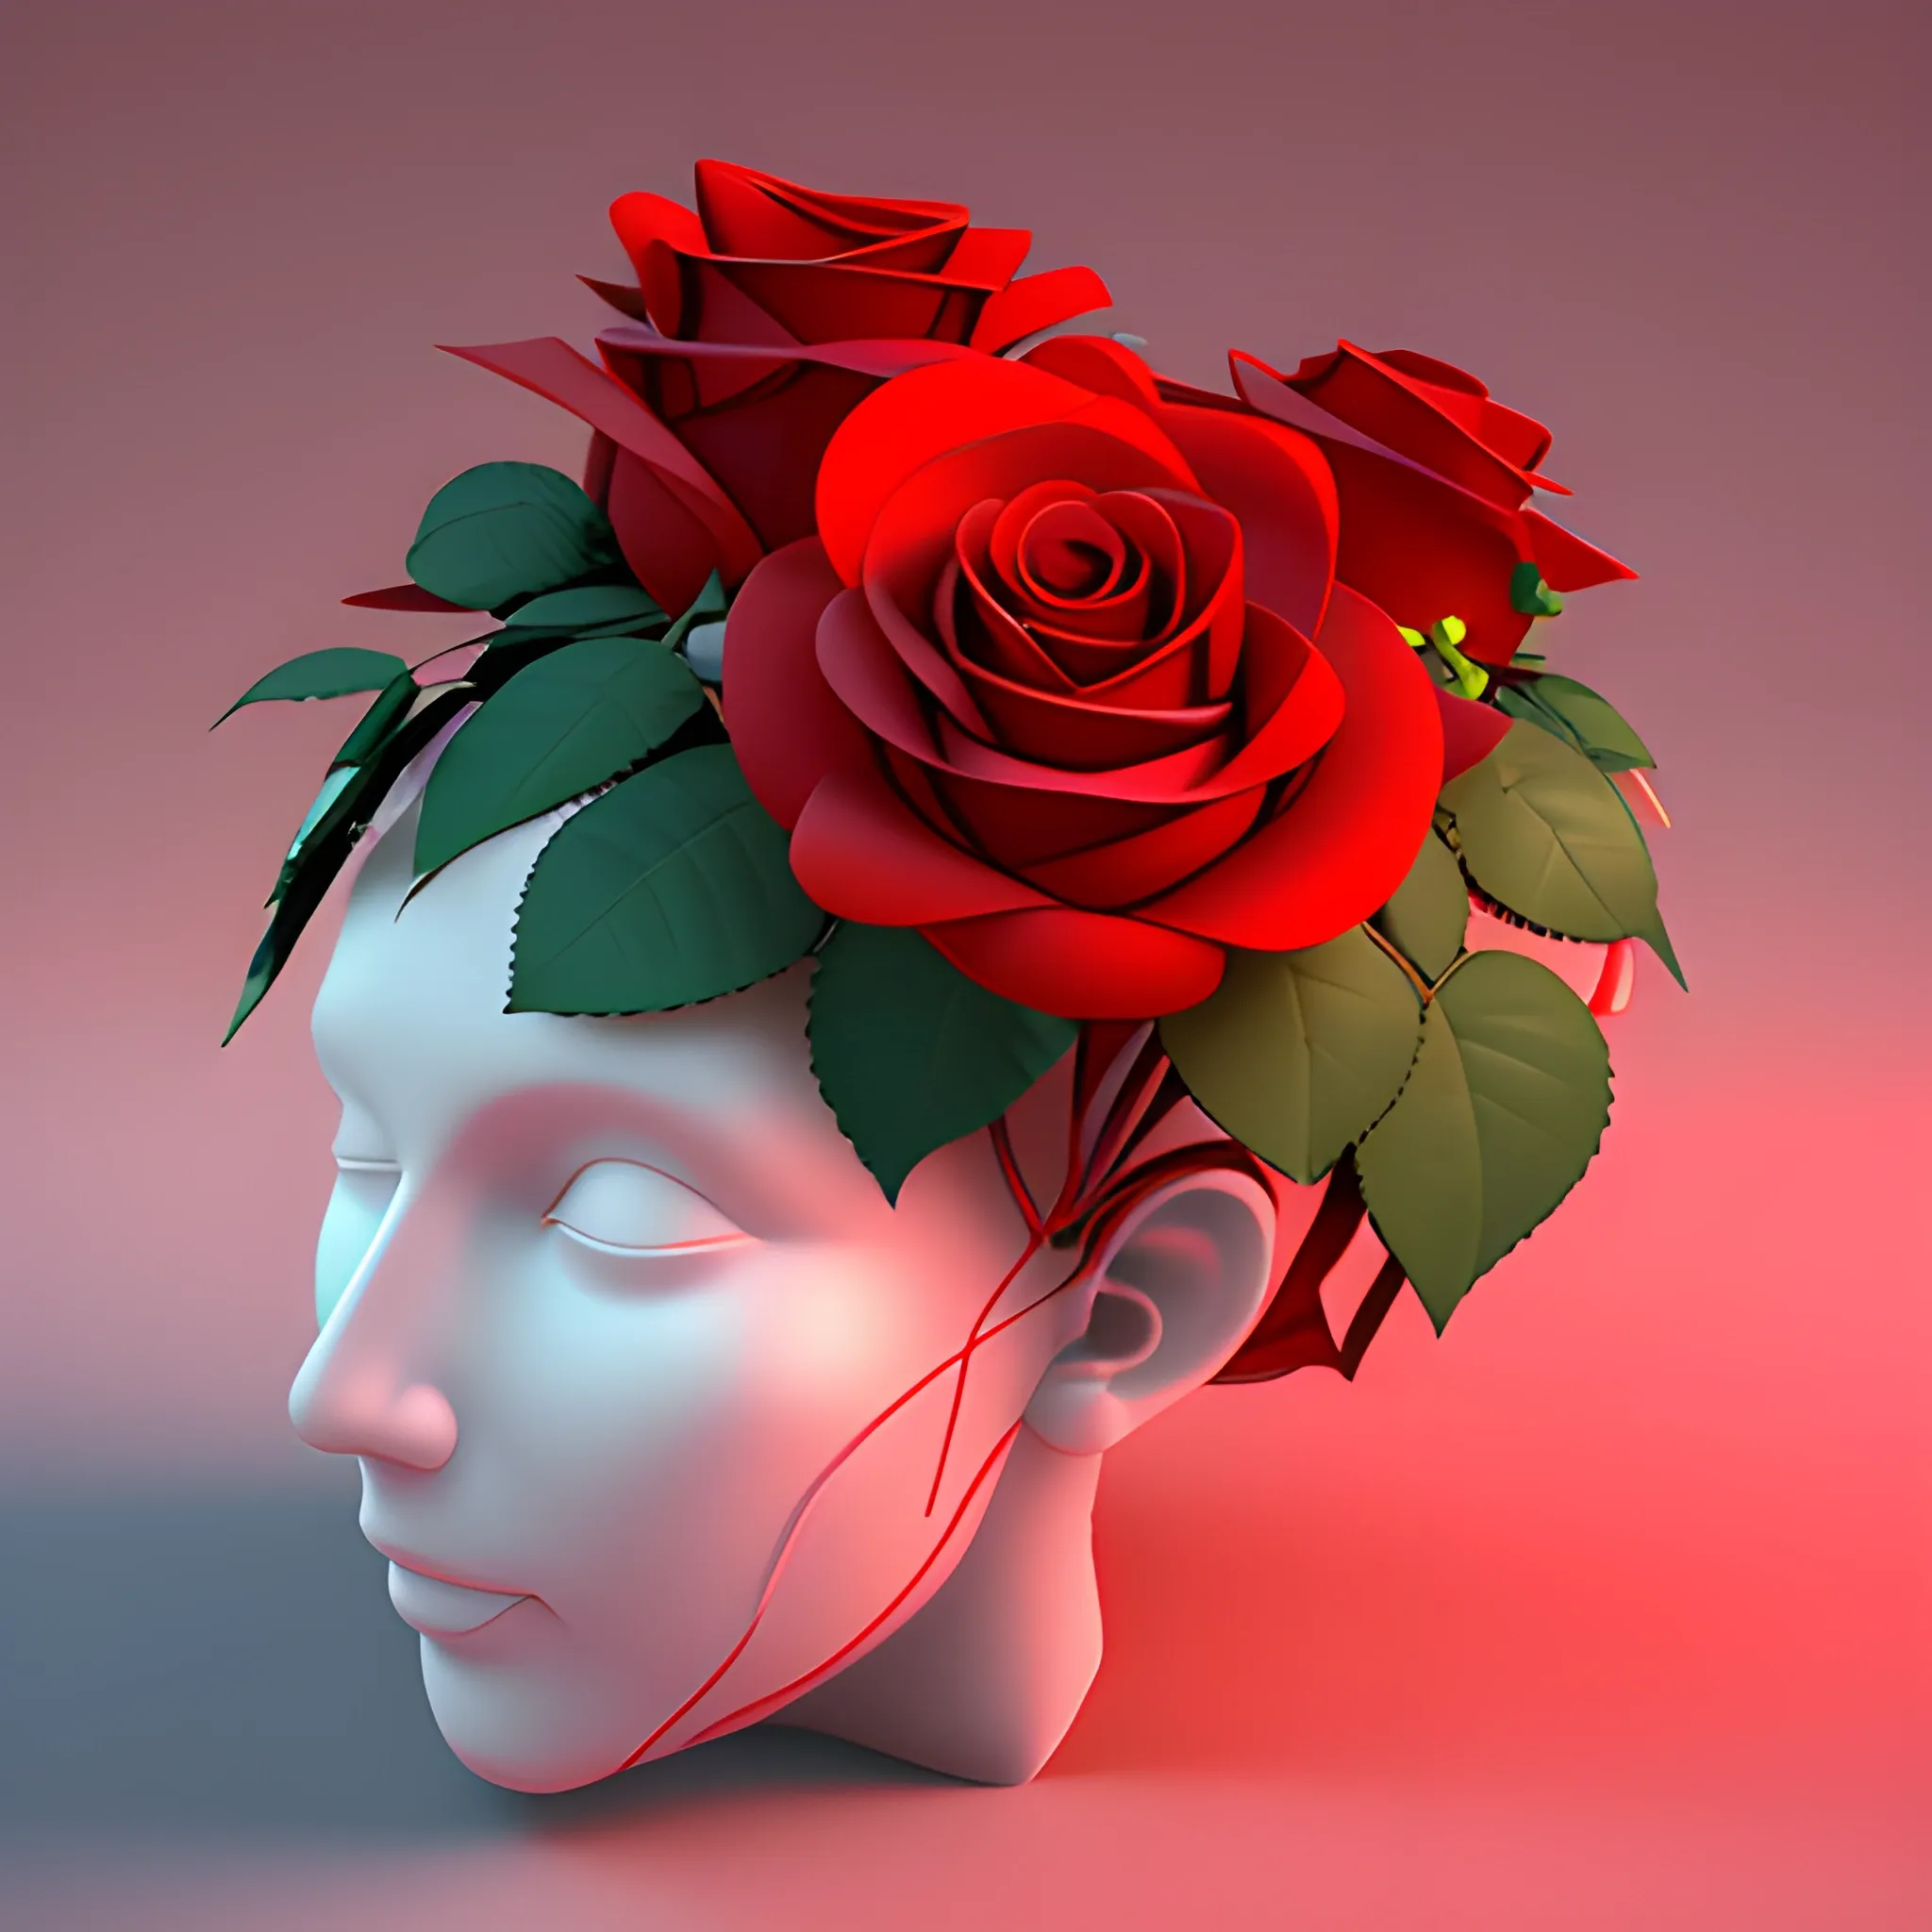 Red roses growing out of brain, 3D